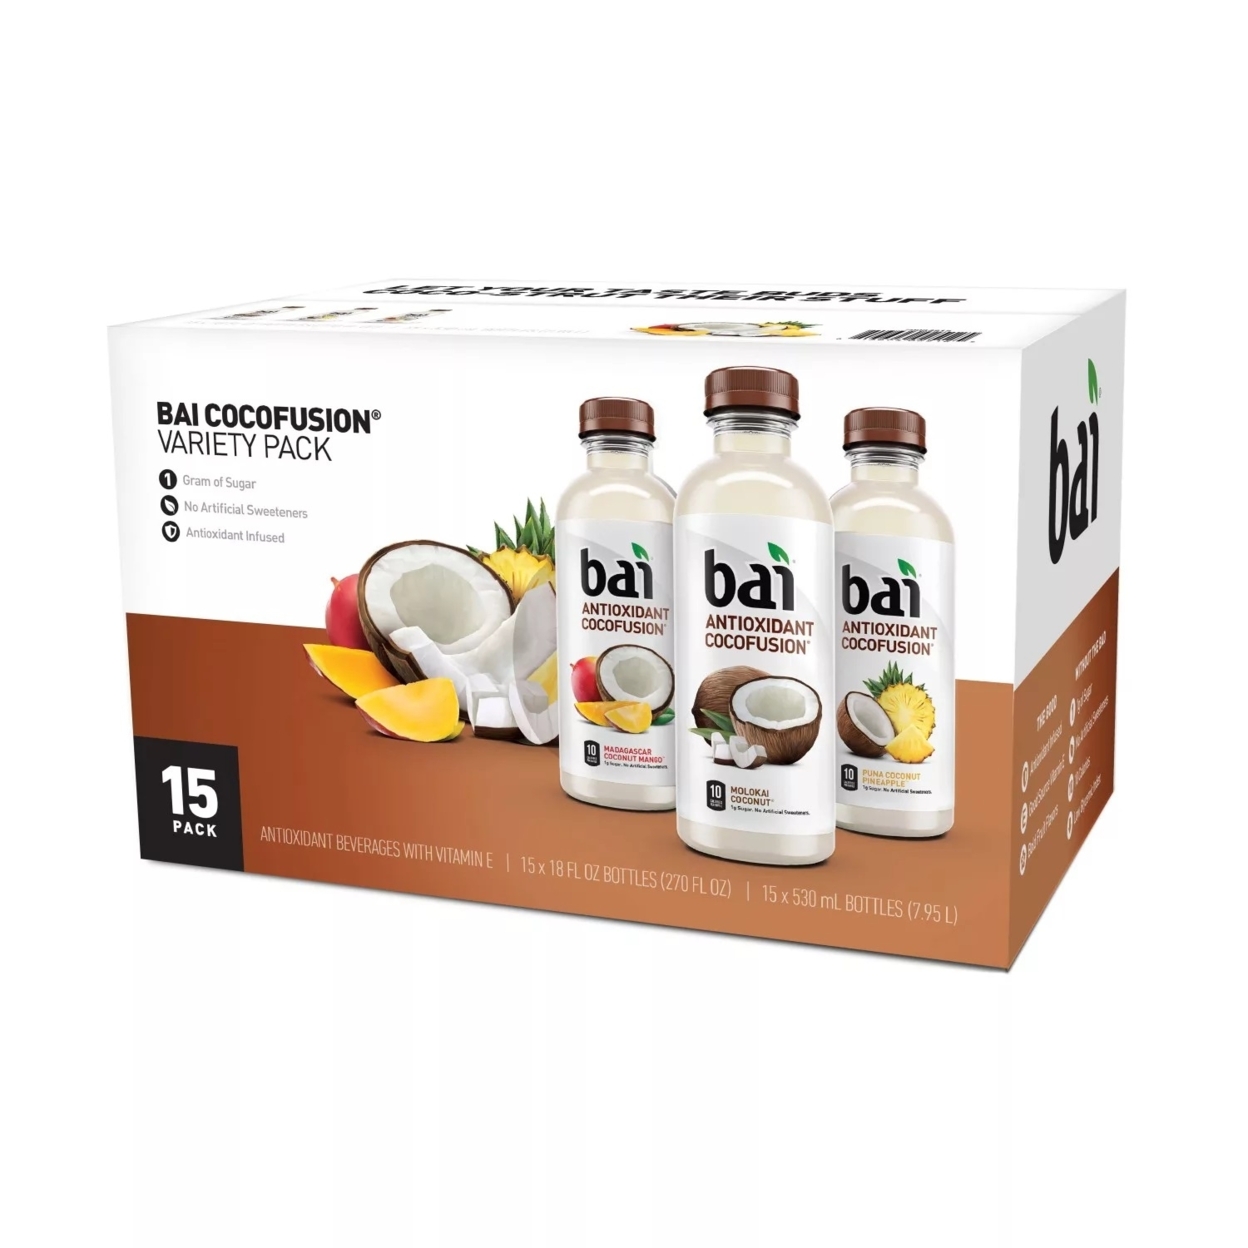 Bai Cocofusions Antioxidant Infused Beverage Variety Pack, 18 Fl Oz (15 Pack)